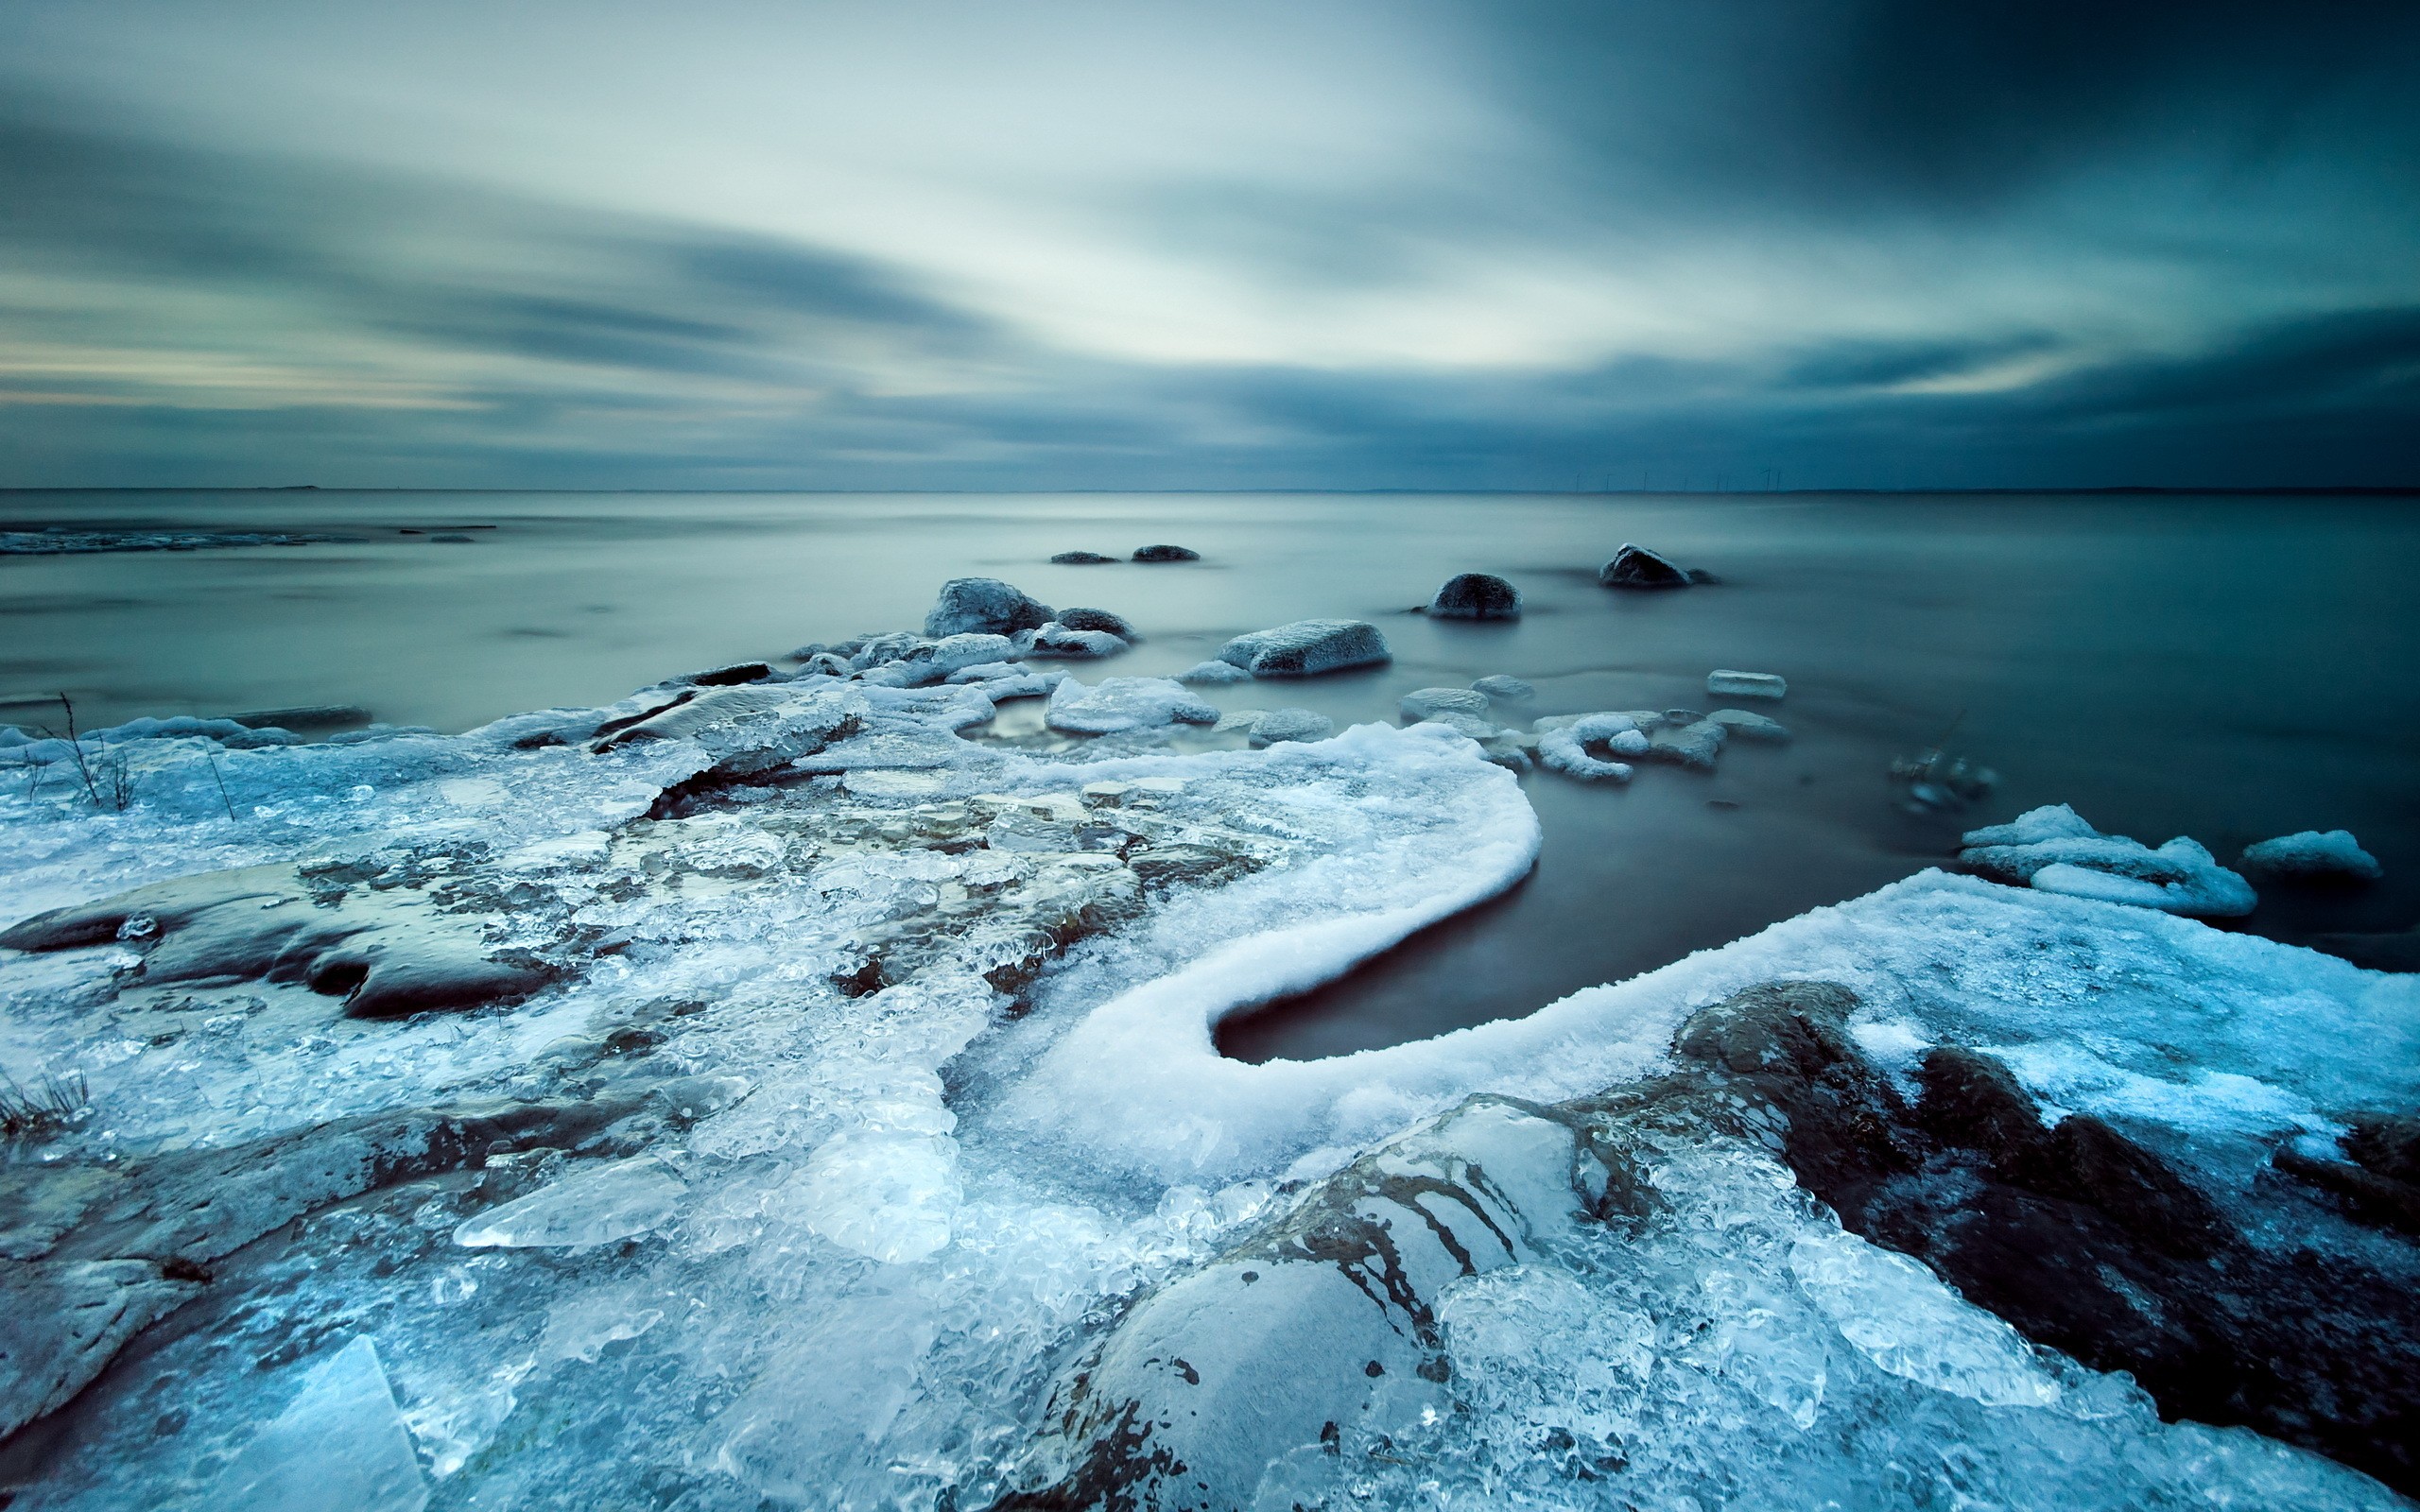 General 2560x1600 coast landscape nature ice snow water long exposure rocks clouds overcast